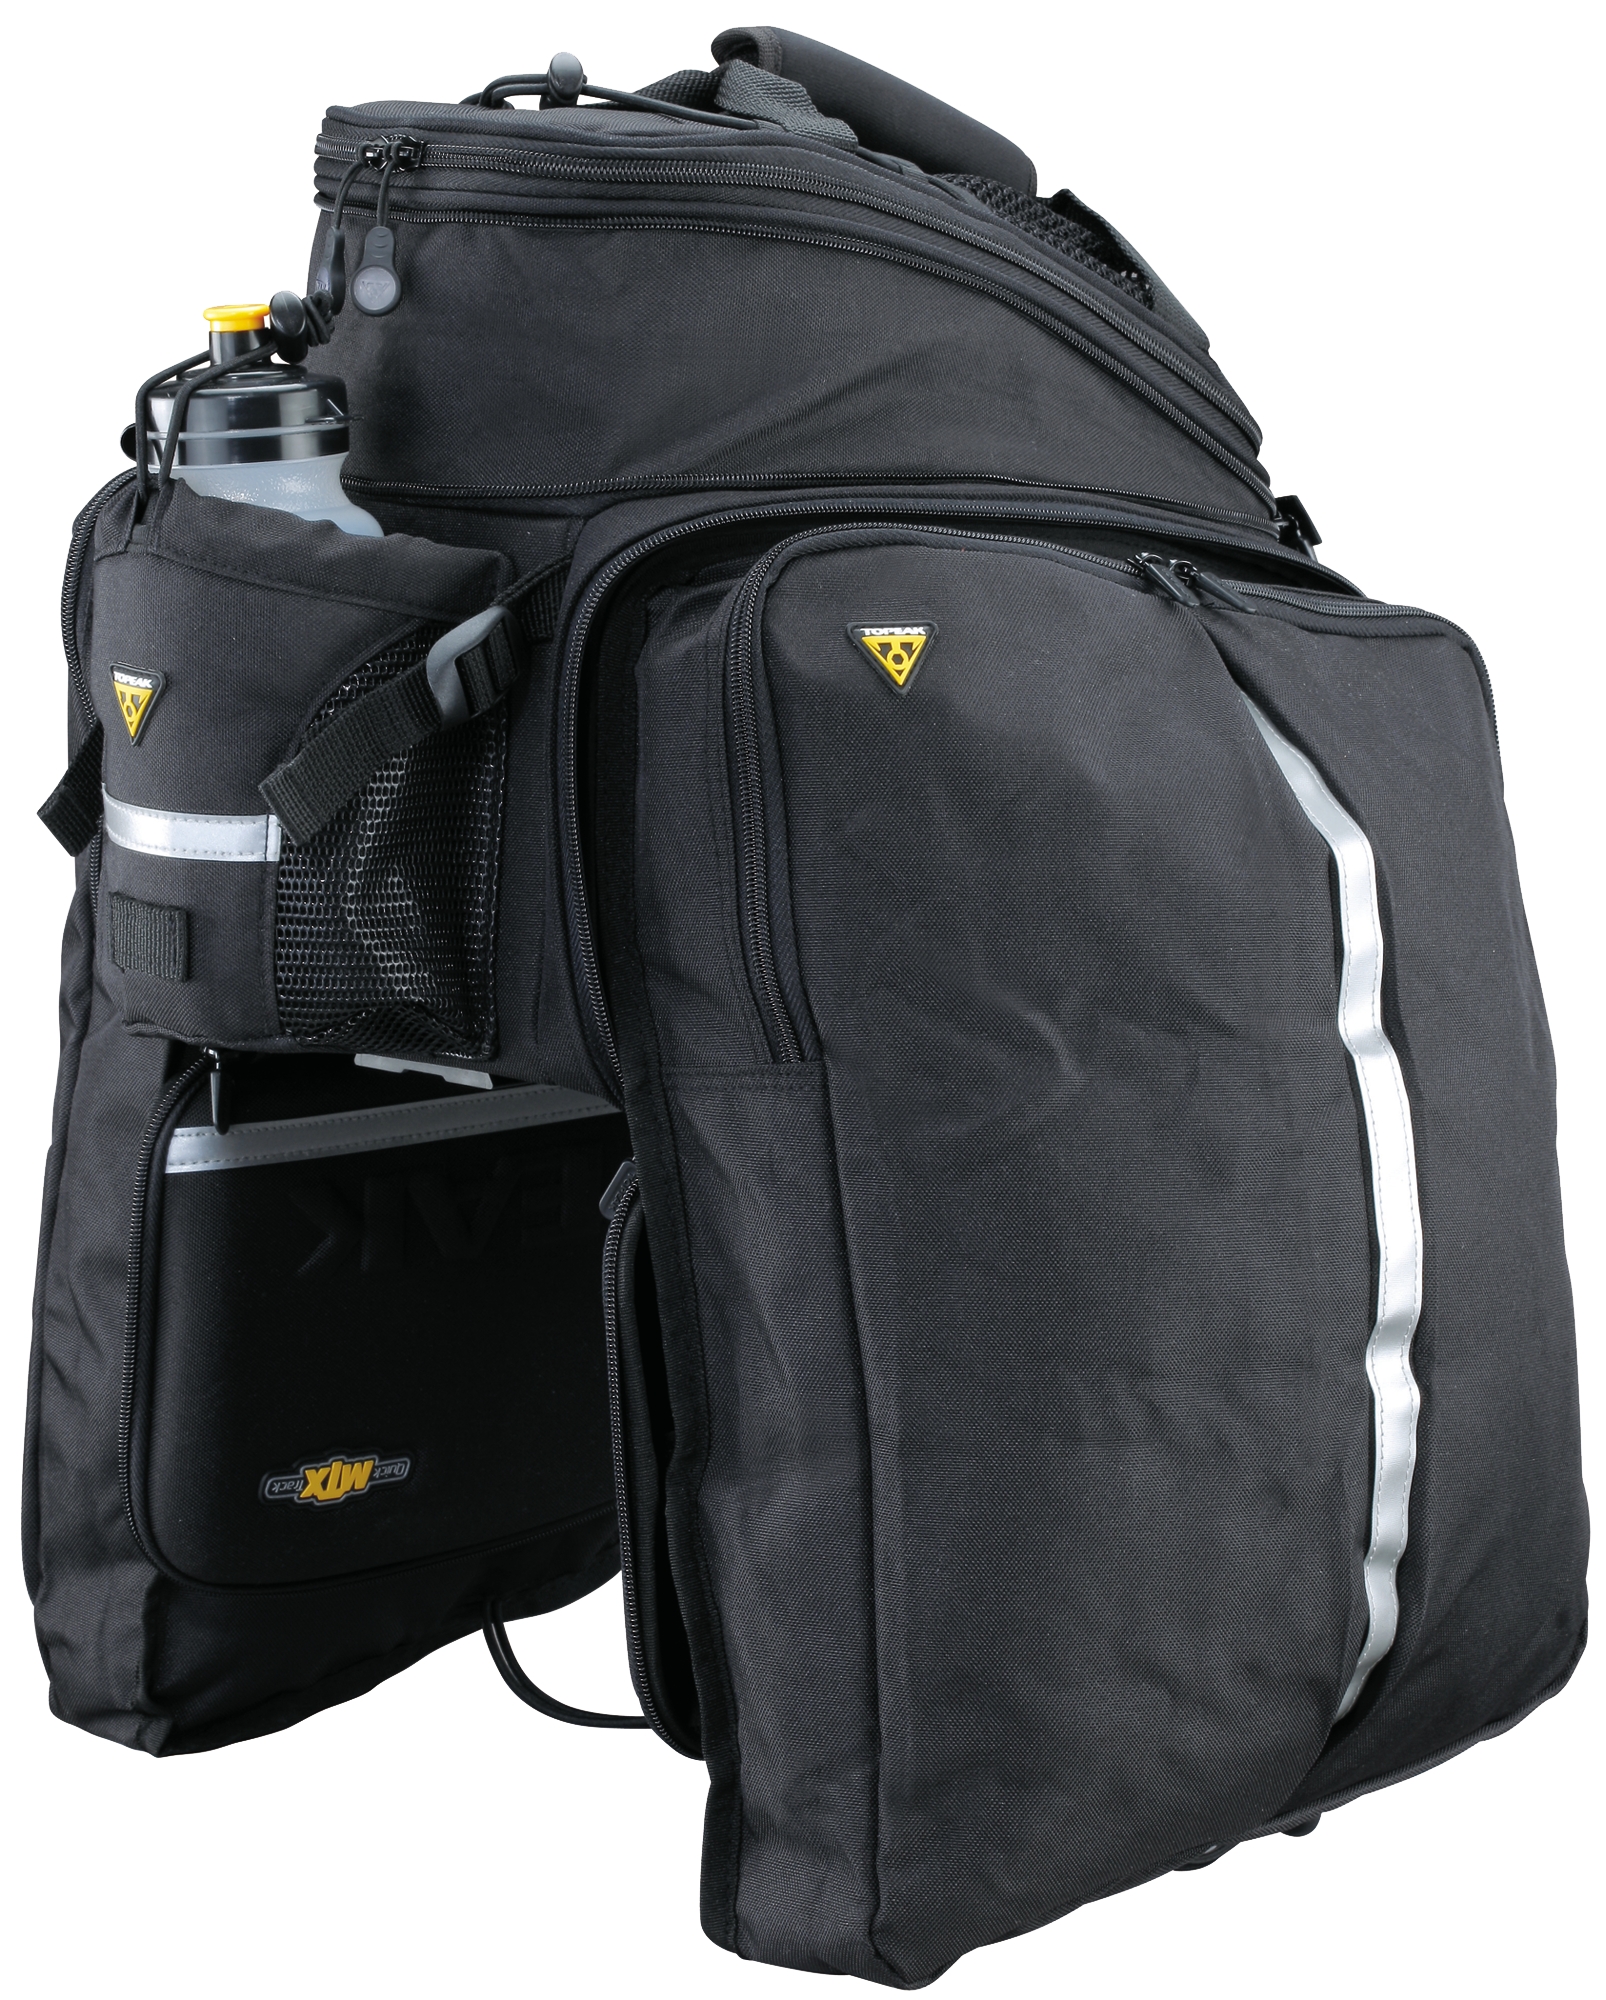 topeak trunk bag dxp with straps